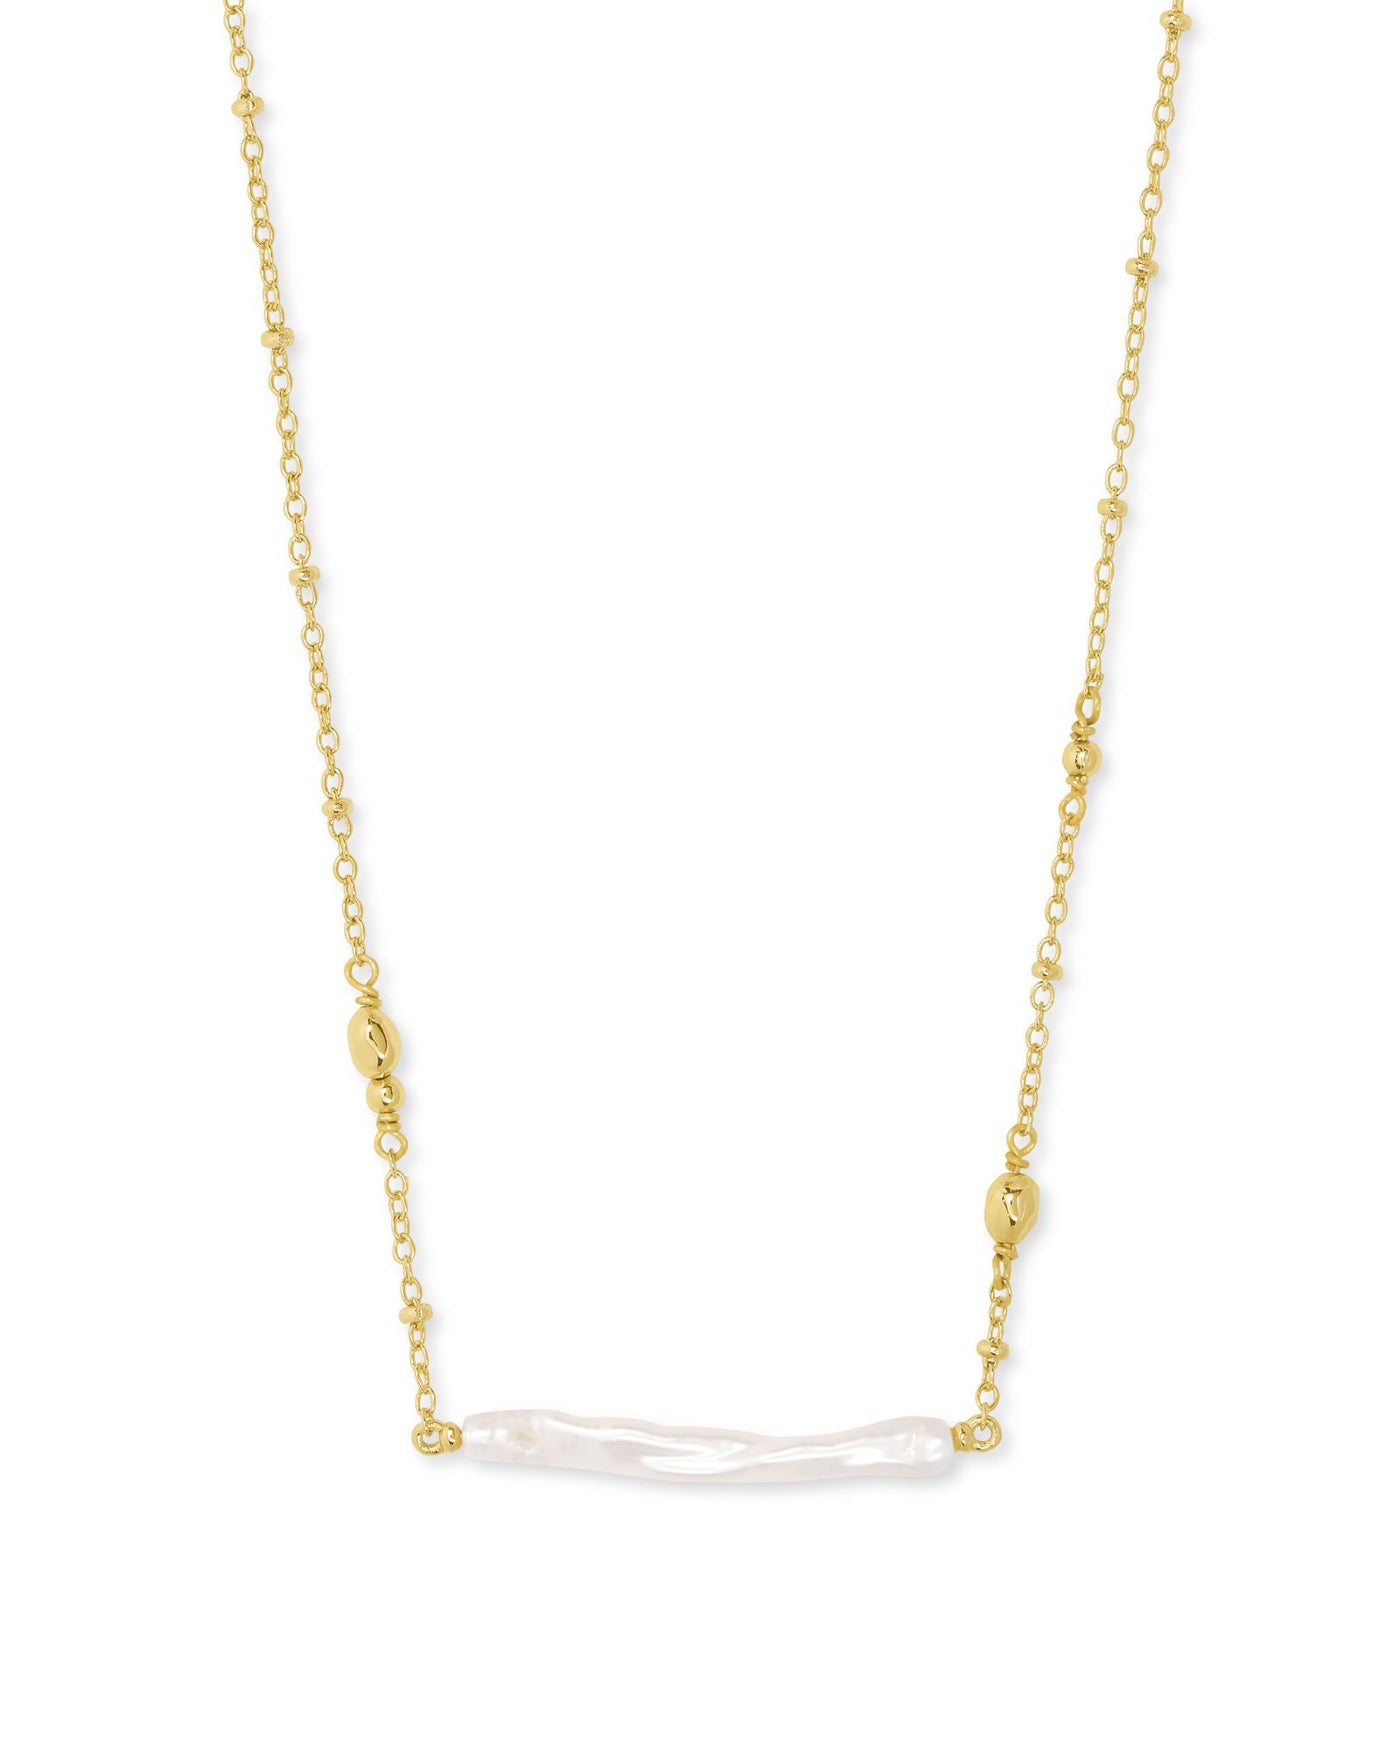 Kendra Scott Ellie Pendant Necklace in Gold on white background close up.